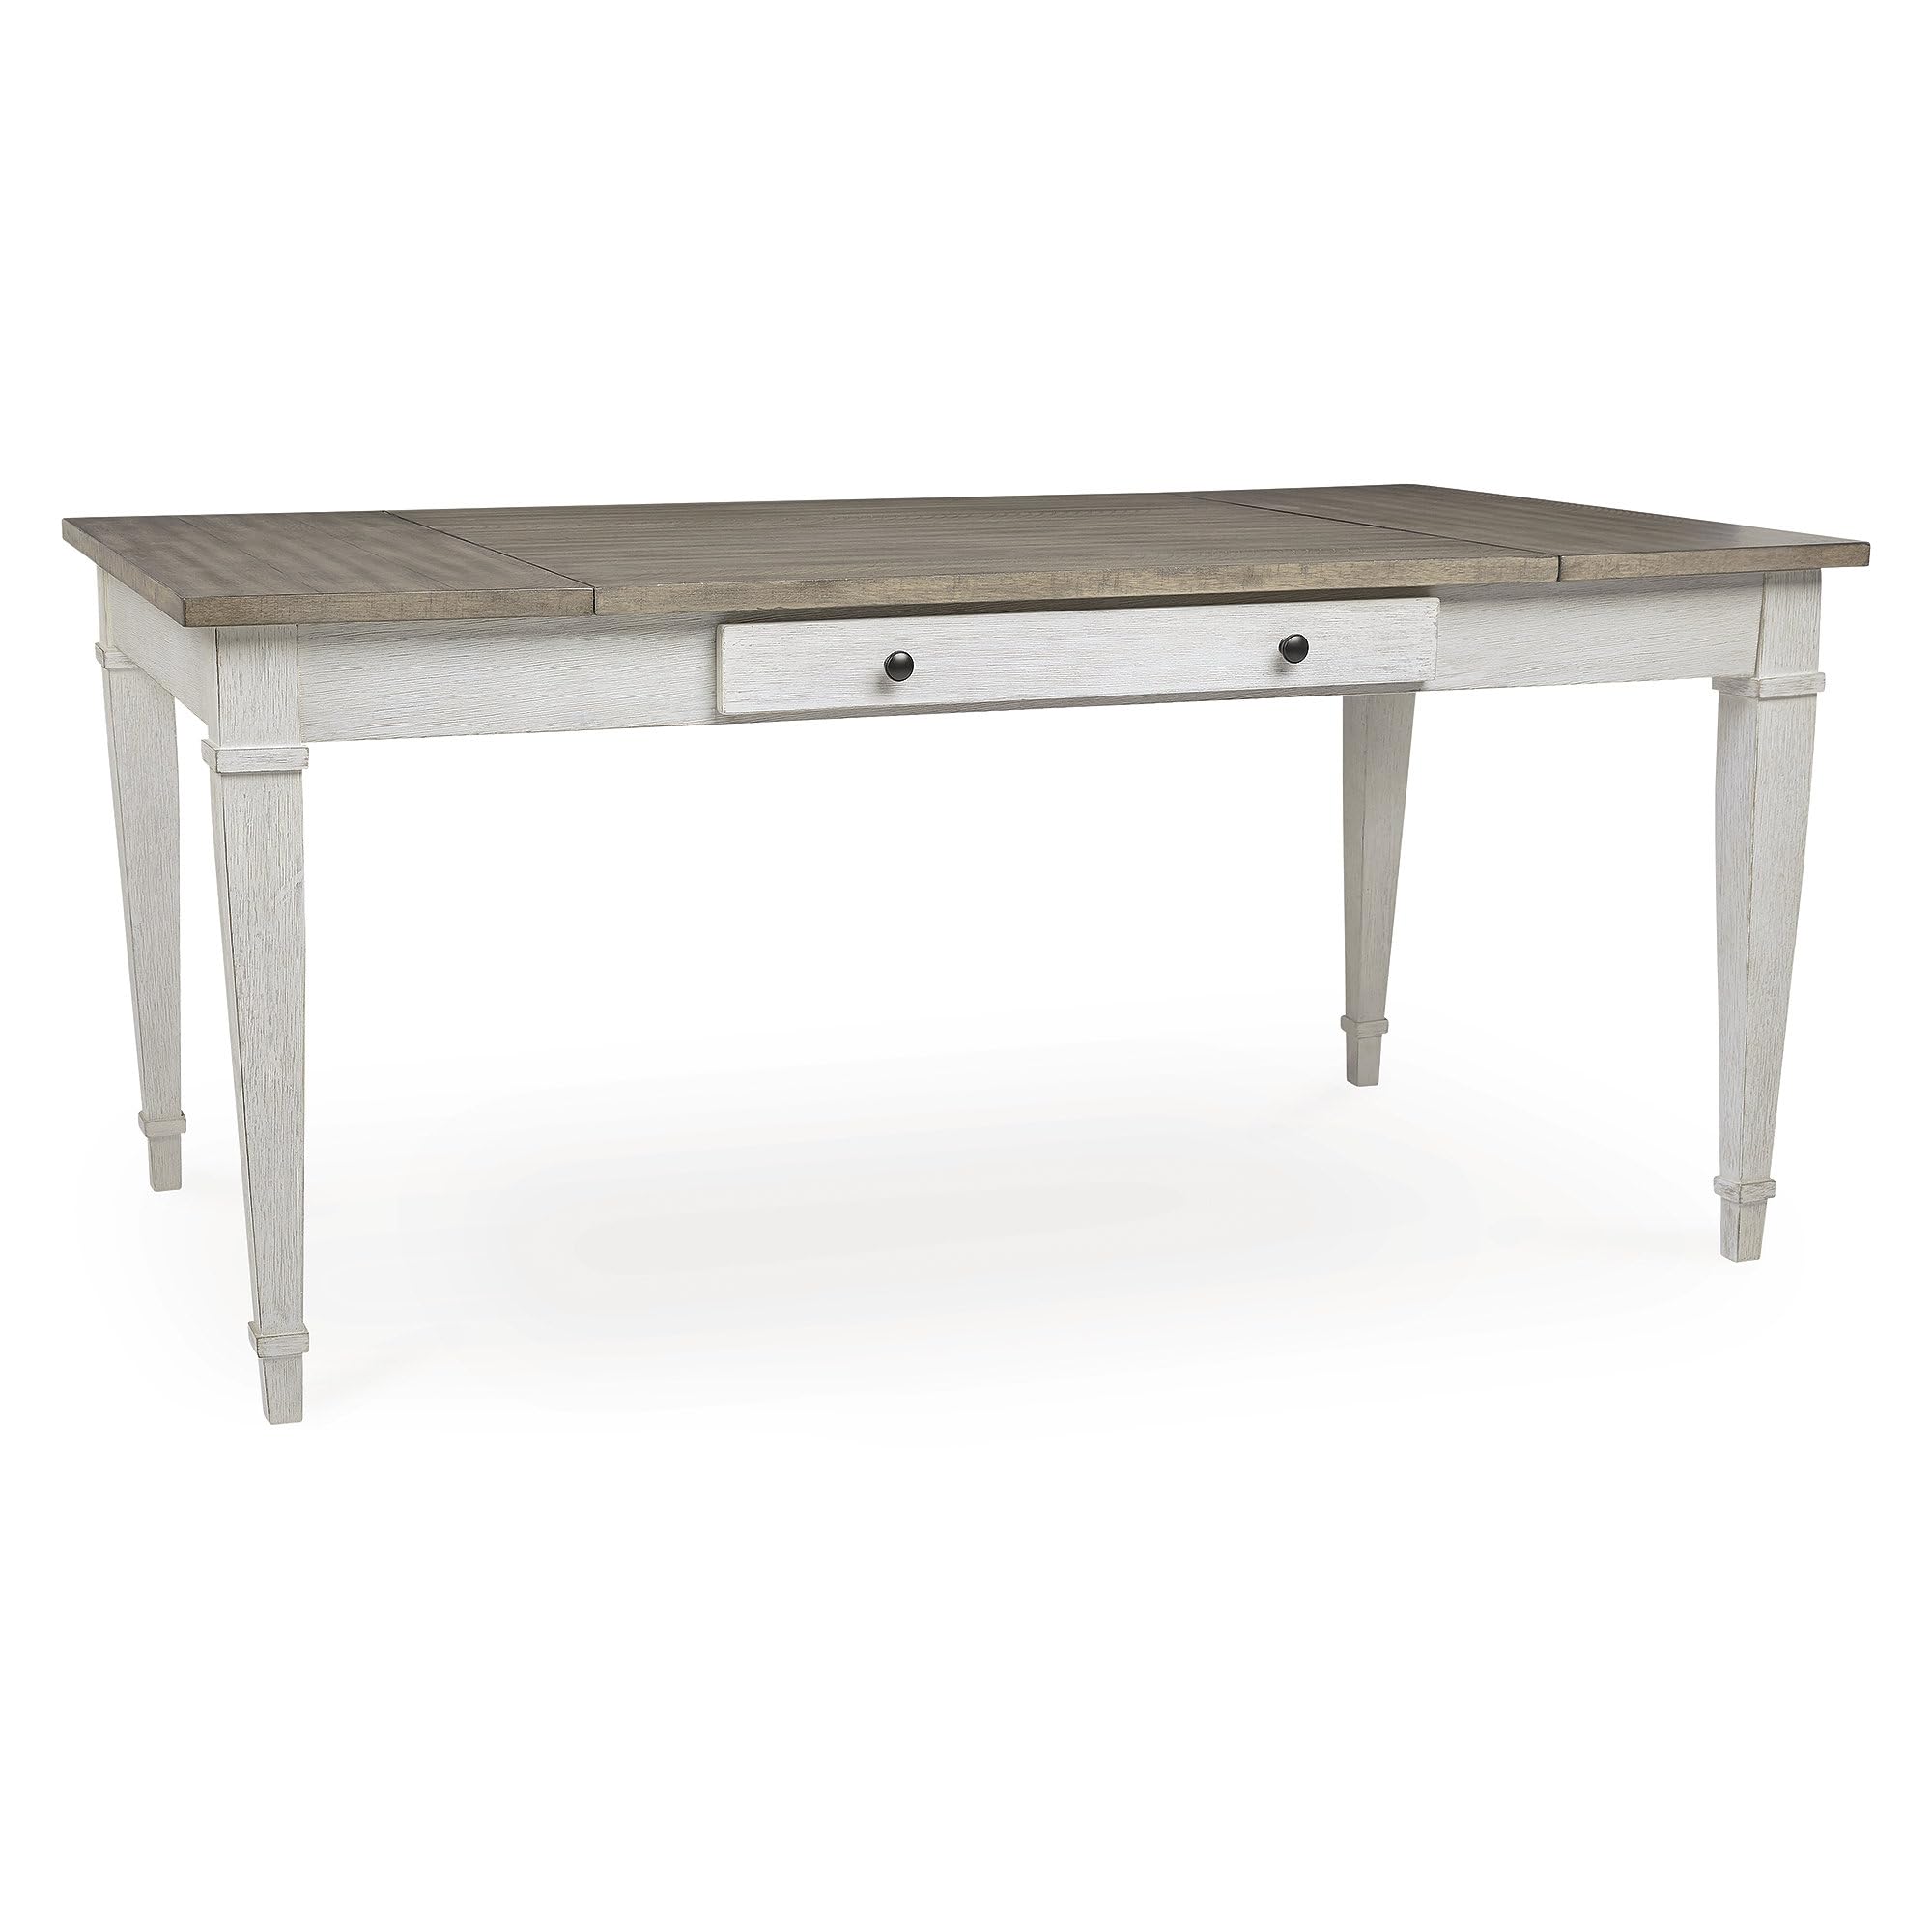 Signature Design by Ashley Skempton Farmhouse Rectangular Dining Room Table with Storage, White & Light Brown